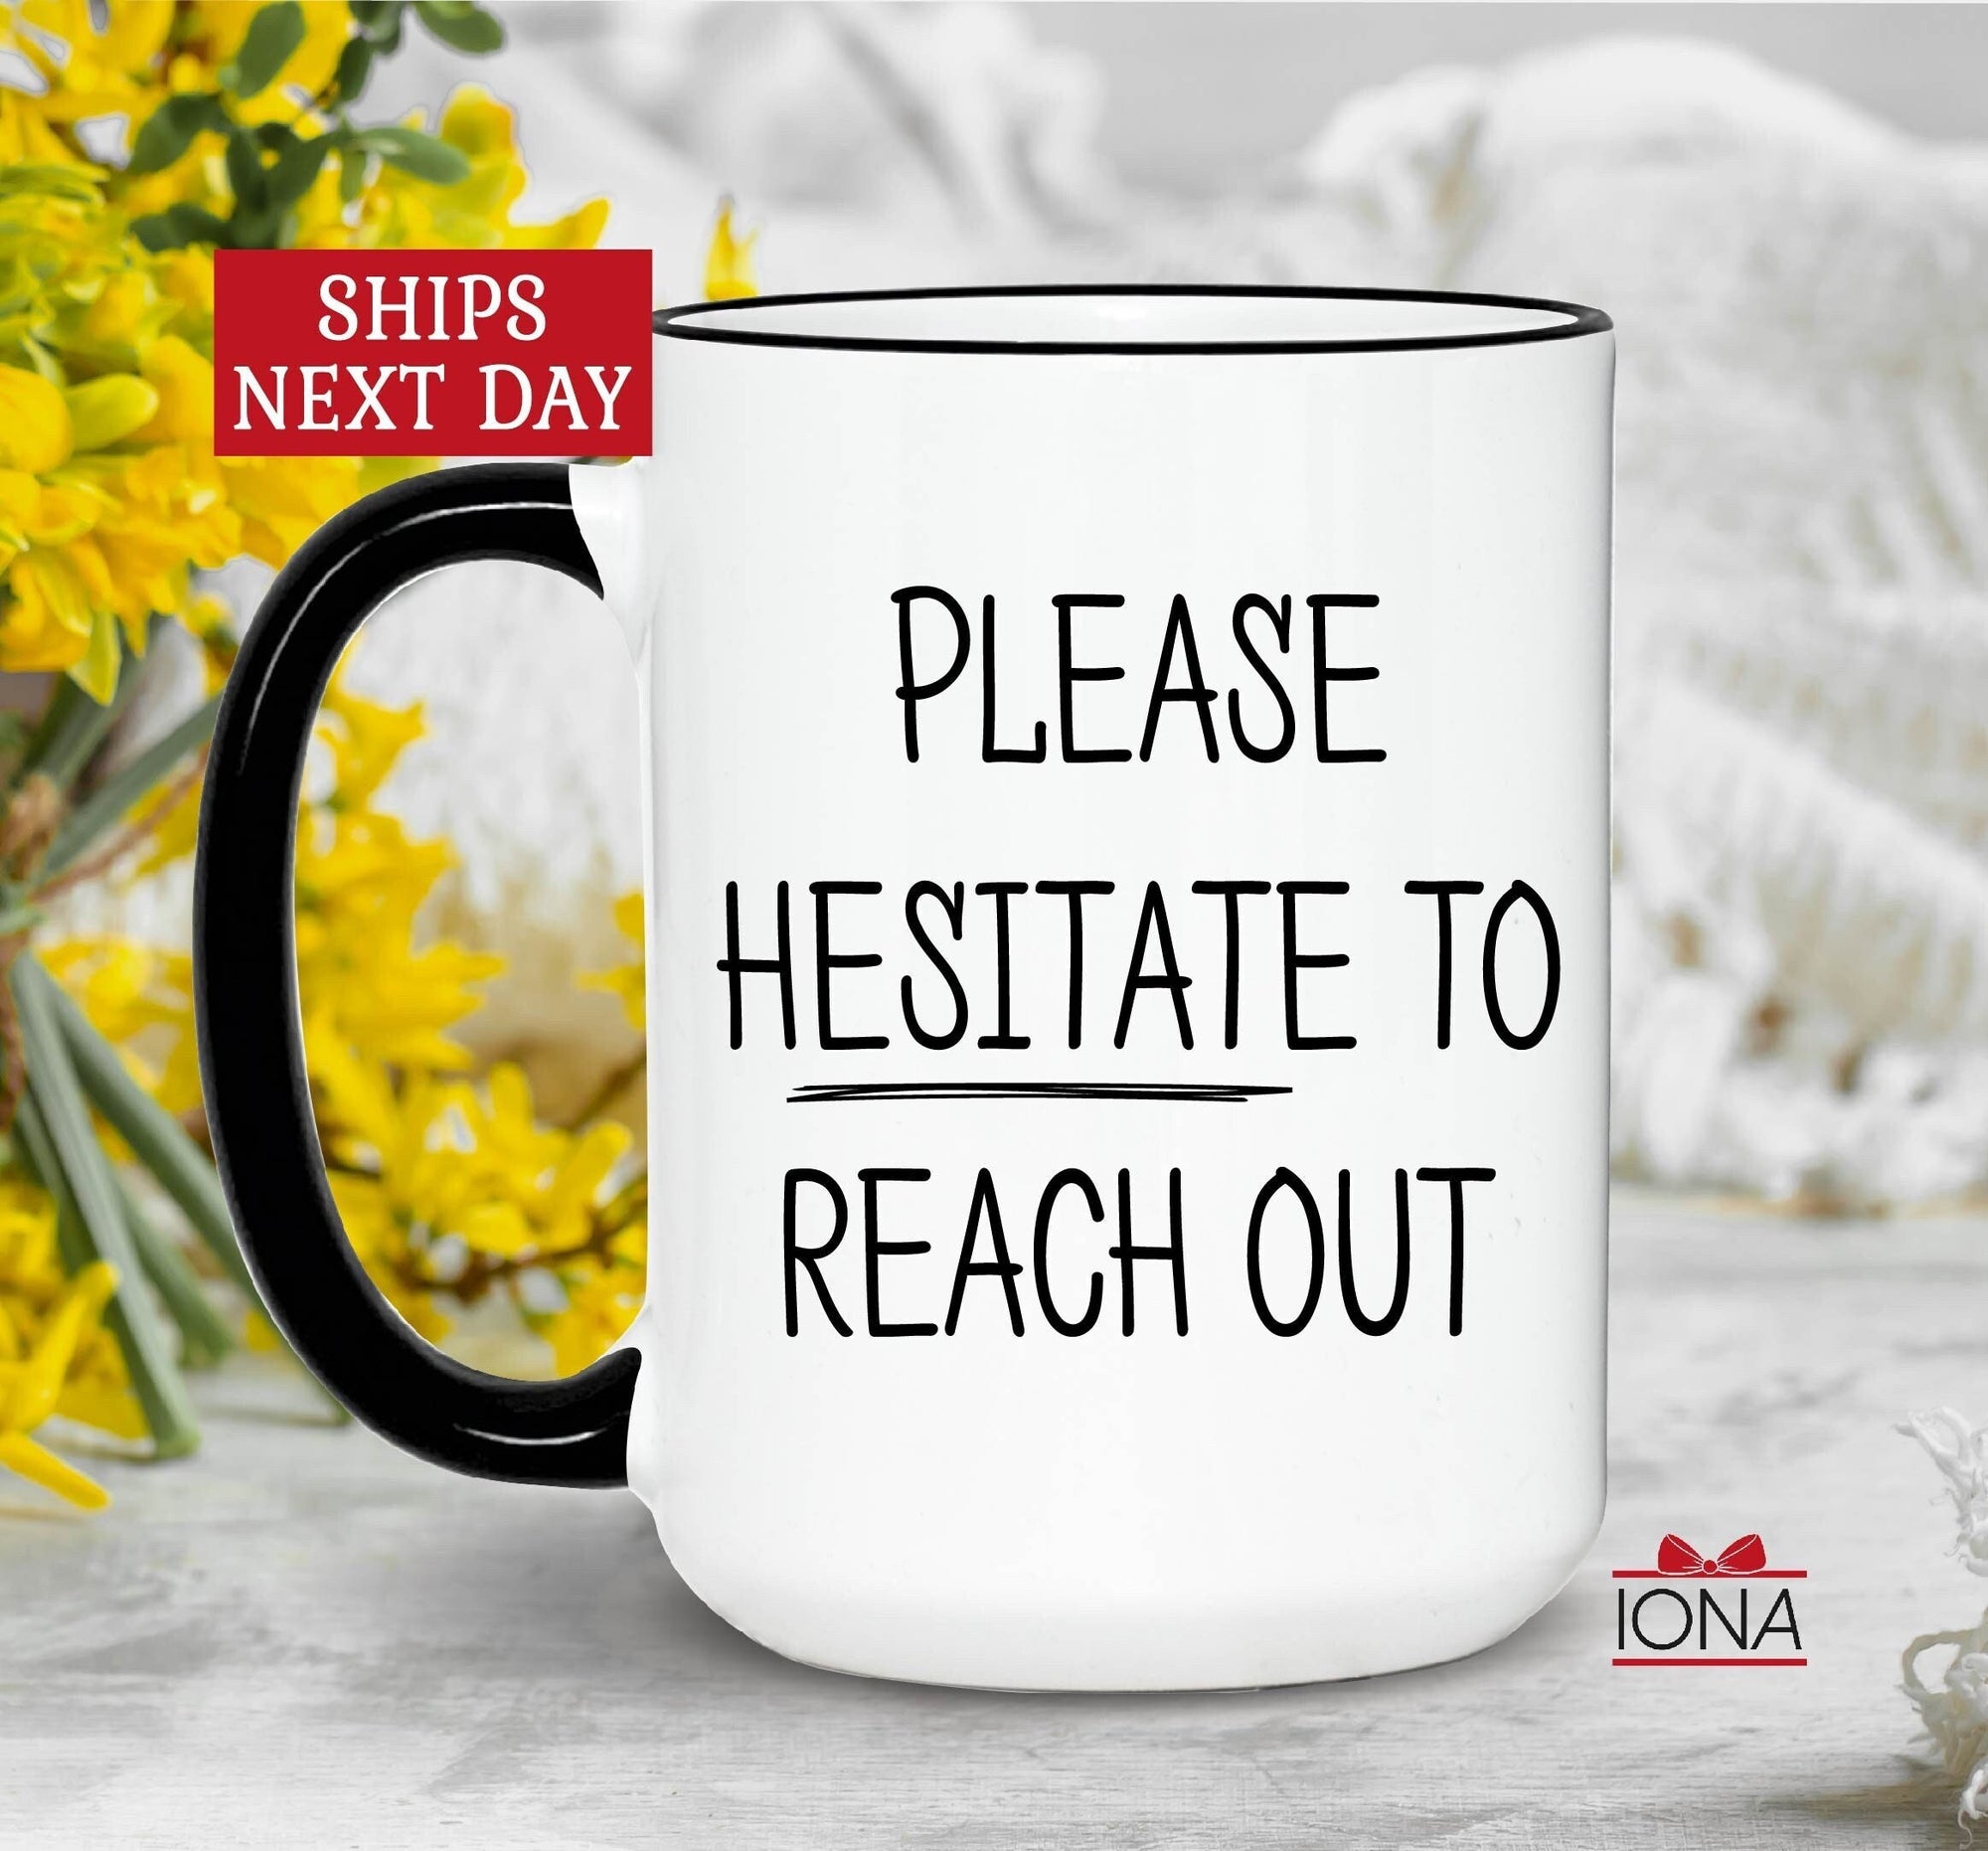 Please Hesitate To Reach Out, Email Mug, Manager Mug, Sarcastic Work Gift, Administrative Gifts, Funny Coworker Cups, Work Friend Birthday!